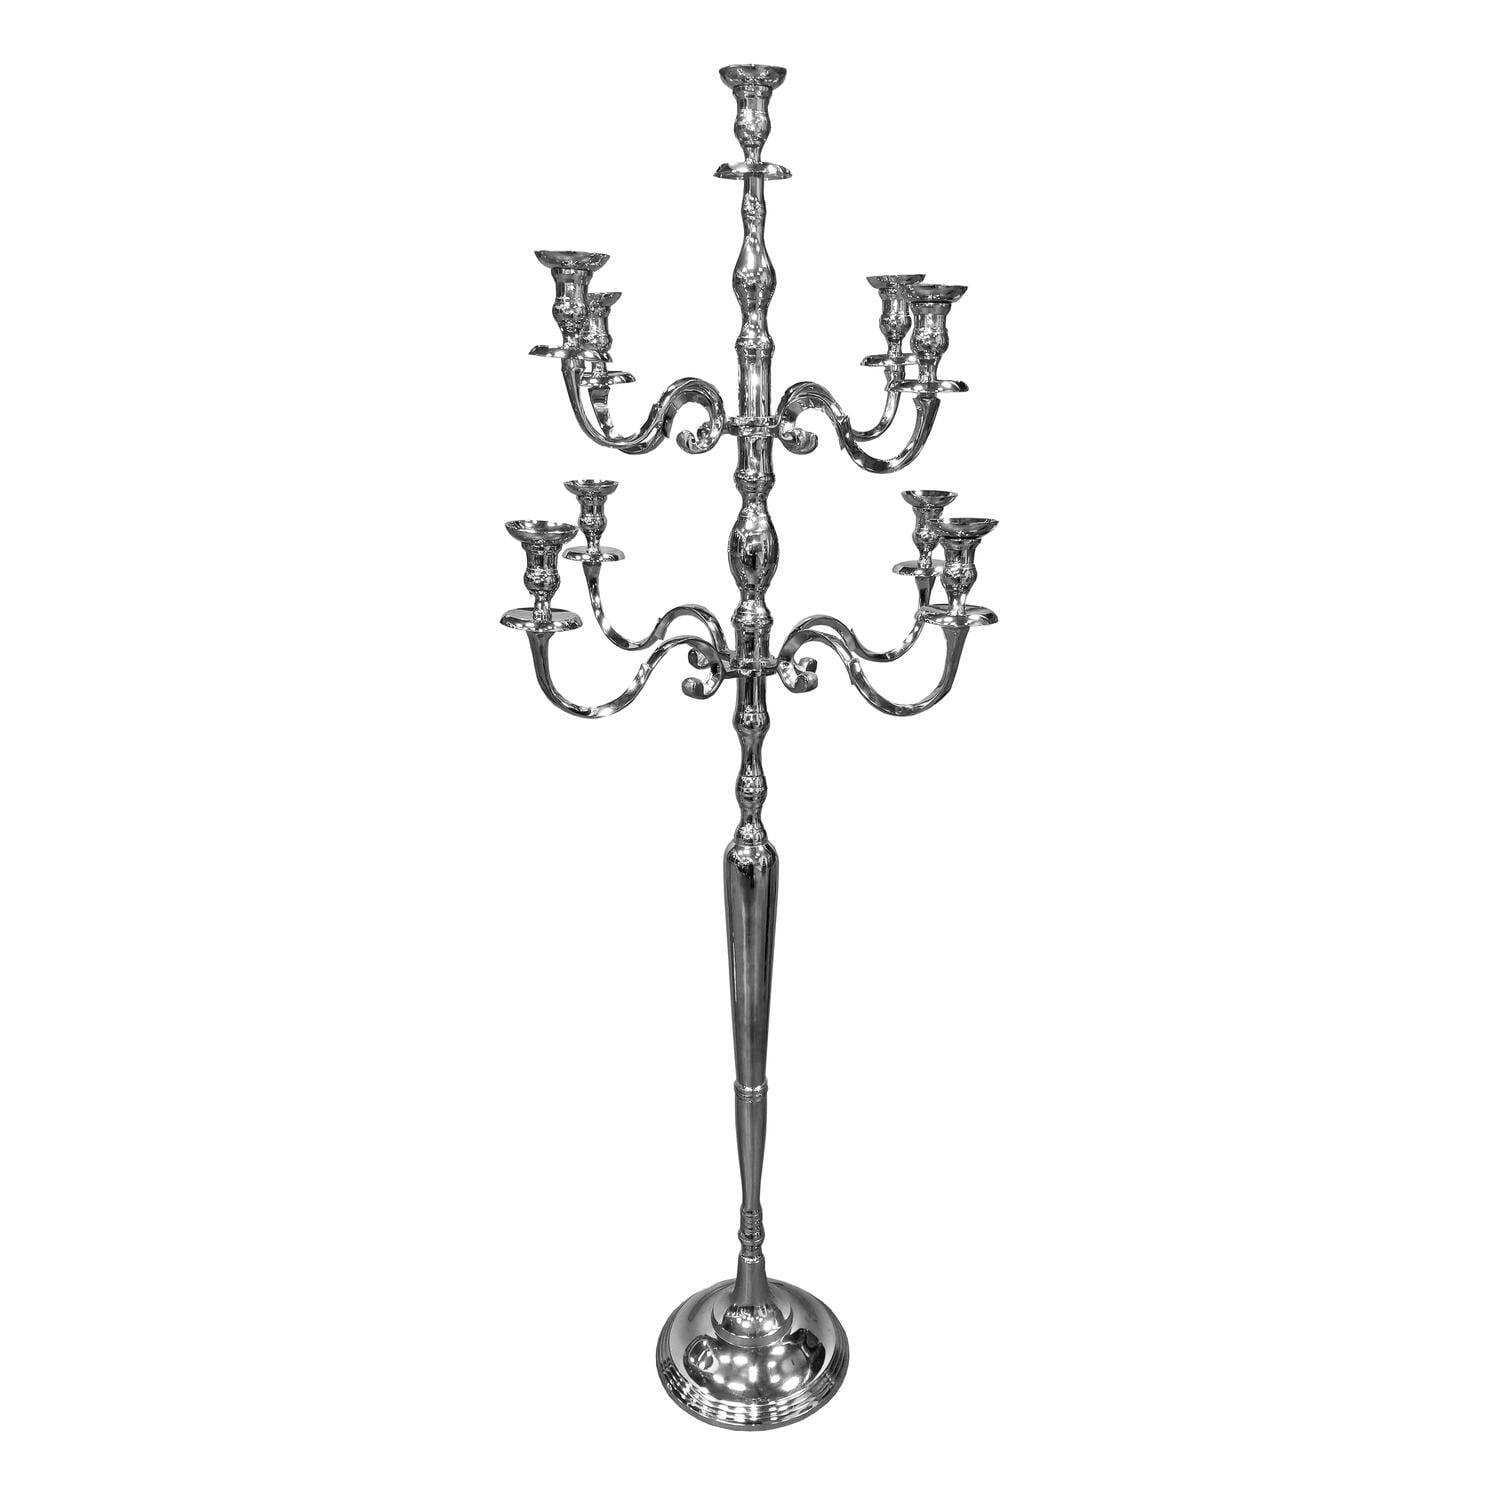 Candelabra Candle Stand Floor or Table & Corners Weddings Parties Events 